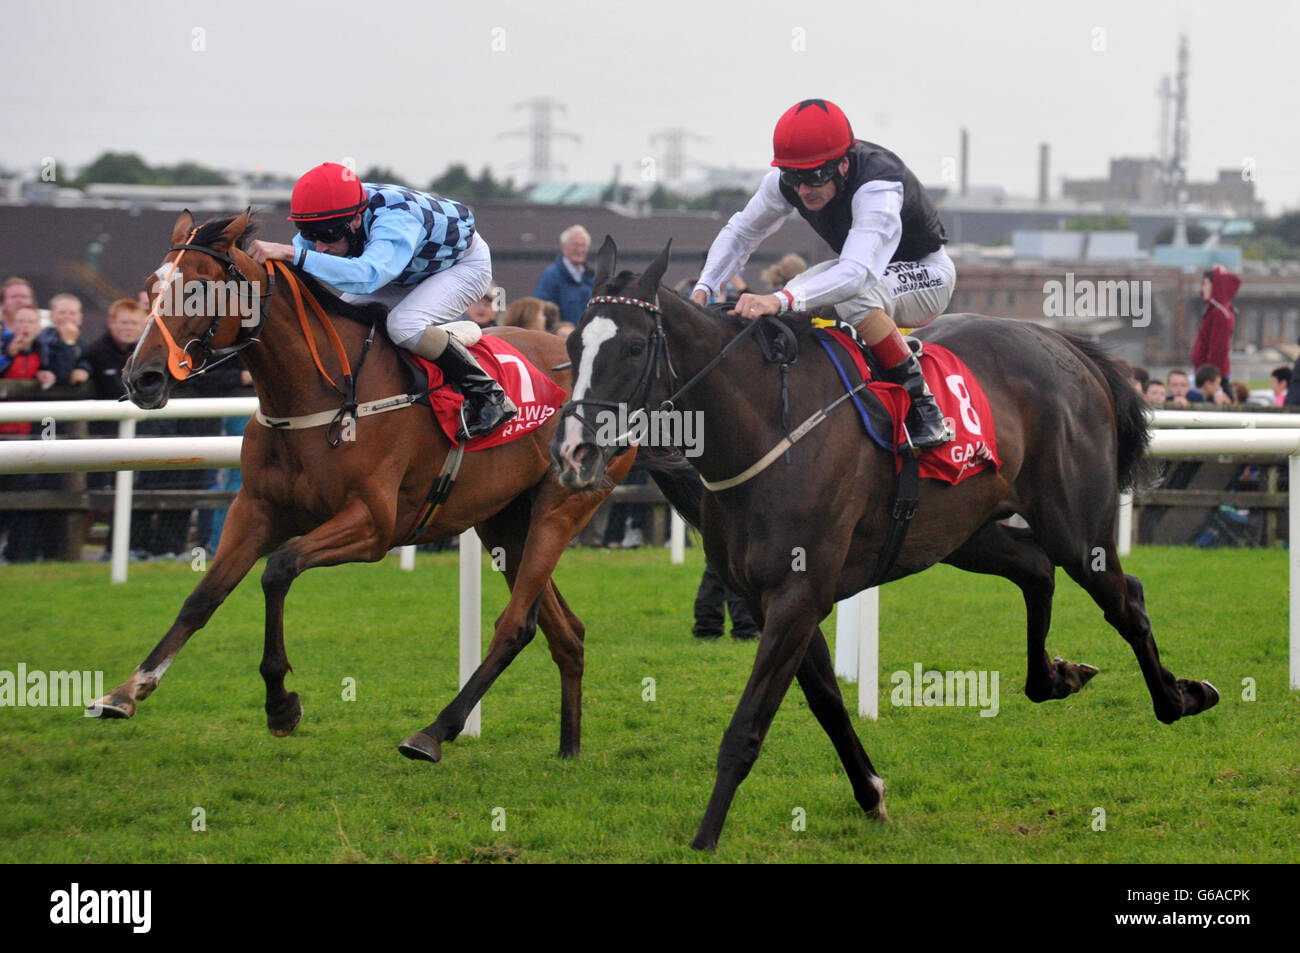 Jockey Pat Smullen (right) rides Unaccompanied to victory in the Guinness Race during day five of the 2013 Galway Summer Festival at Galway Racecourse, Ballybrit, Ireland. Stock Photo